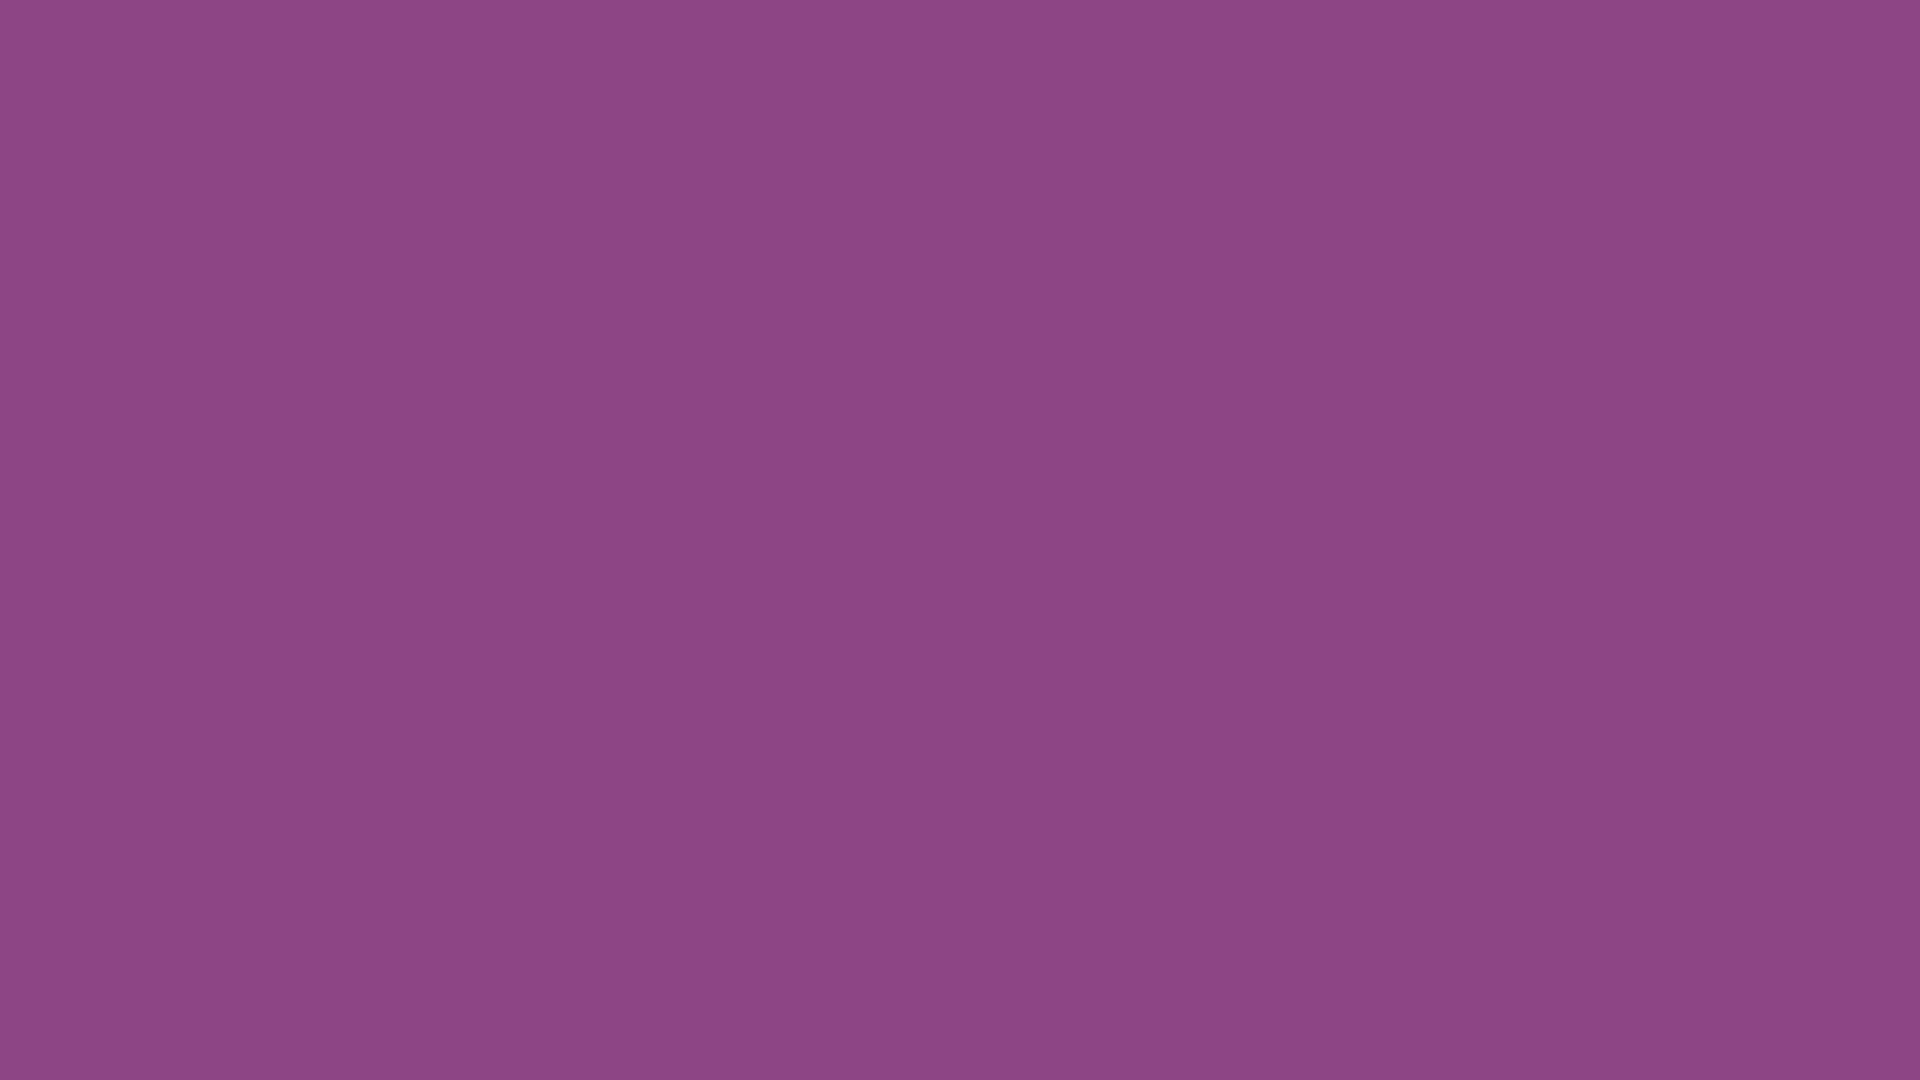 1920x1080 ... Solid Color Wallpaper Border with Plum Color